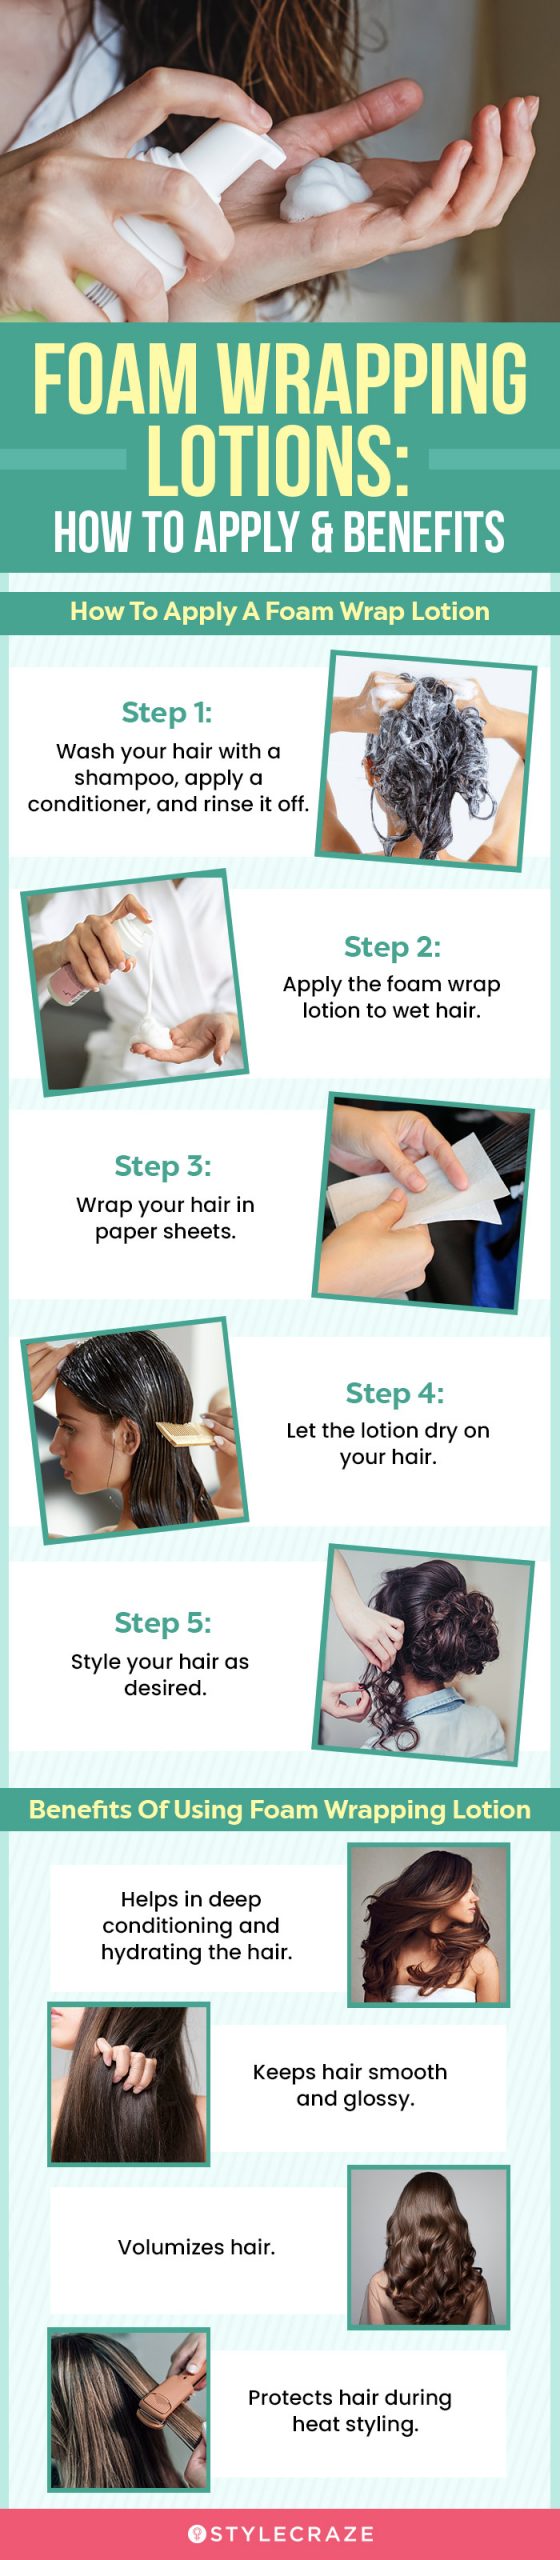 Foam Wrapping Lotions: How To Apply & Benefits (infographic) 